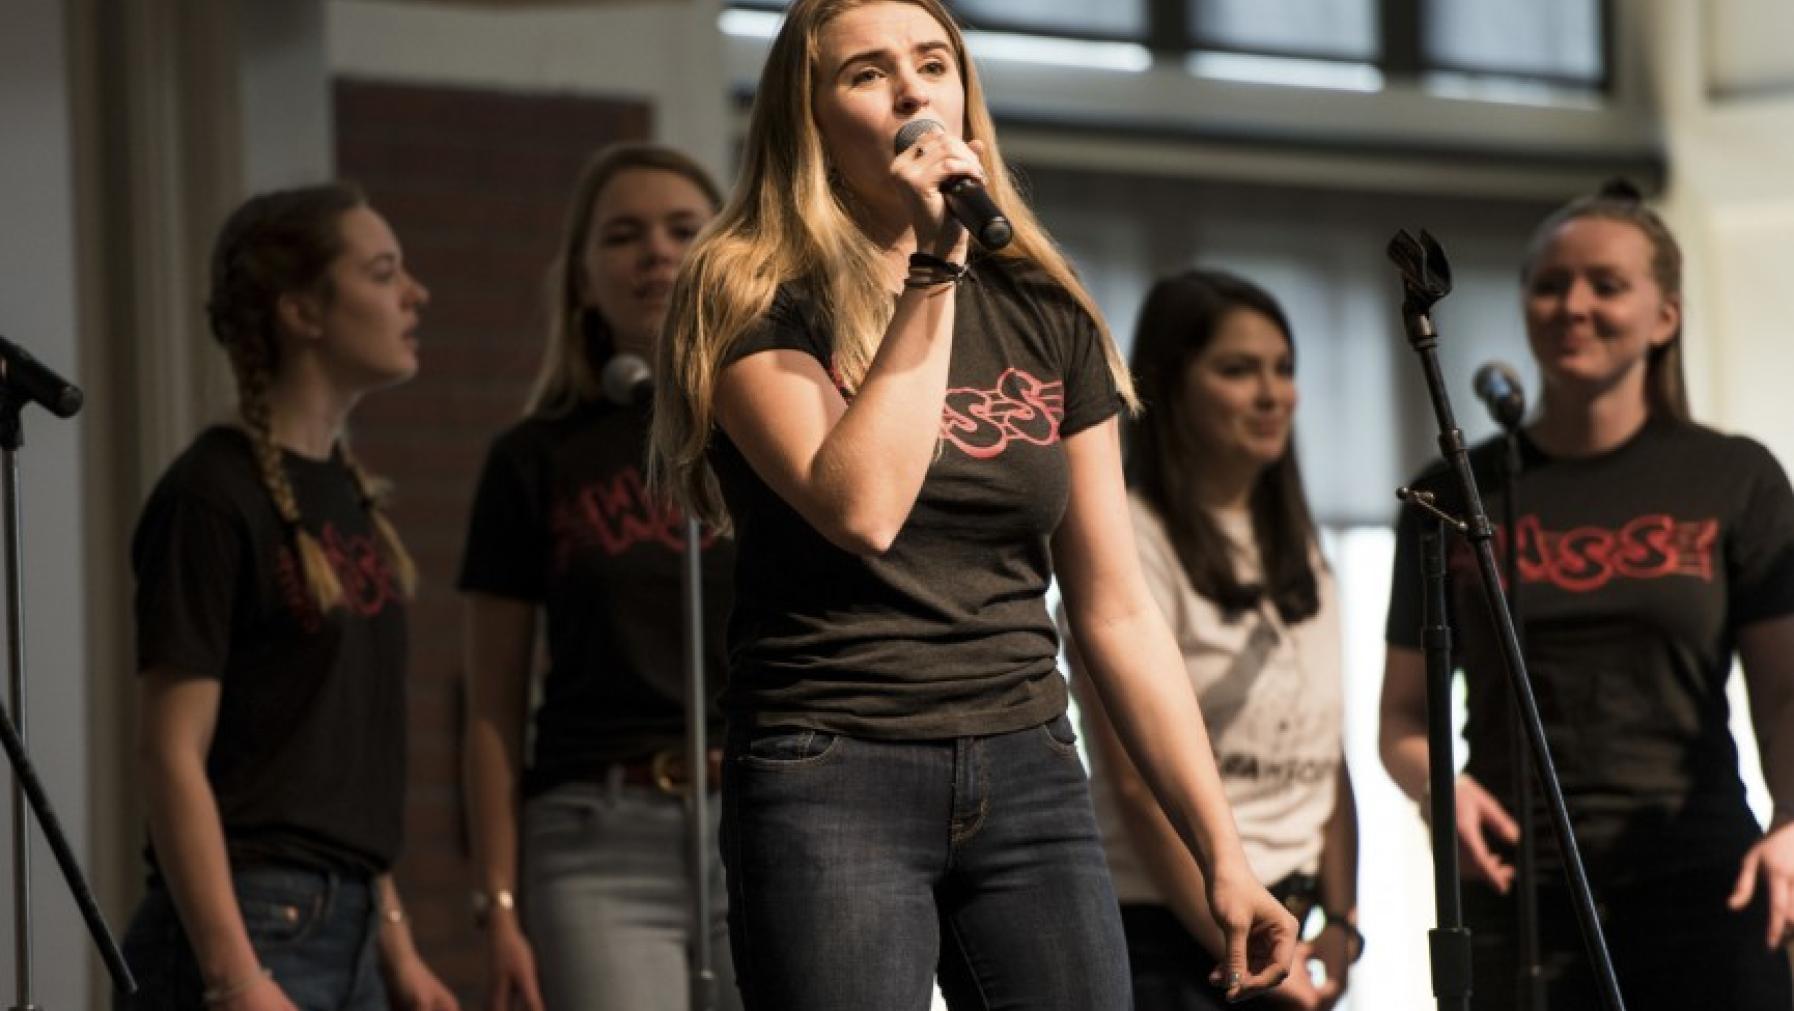 Student performances in the Wheelock Student Center kept energy high during the middle of the inauguration day. Photo by Gabe Newman '17.